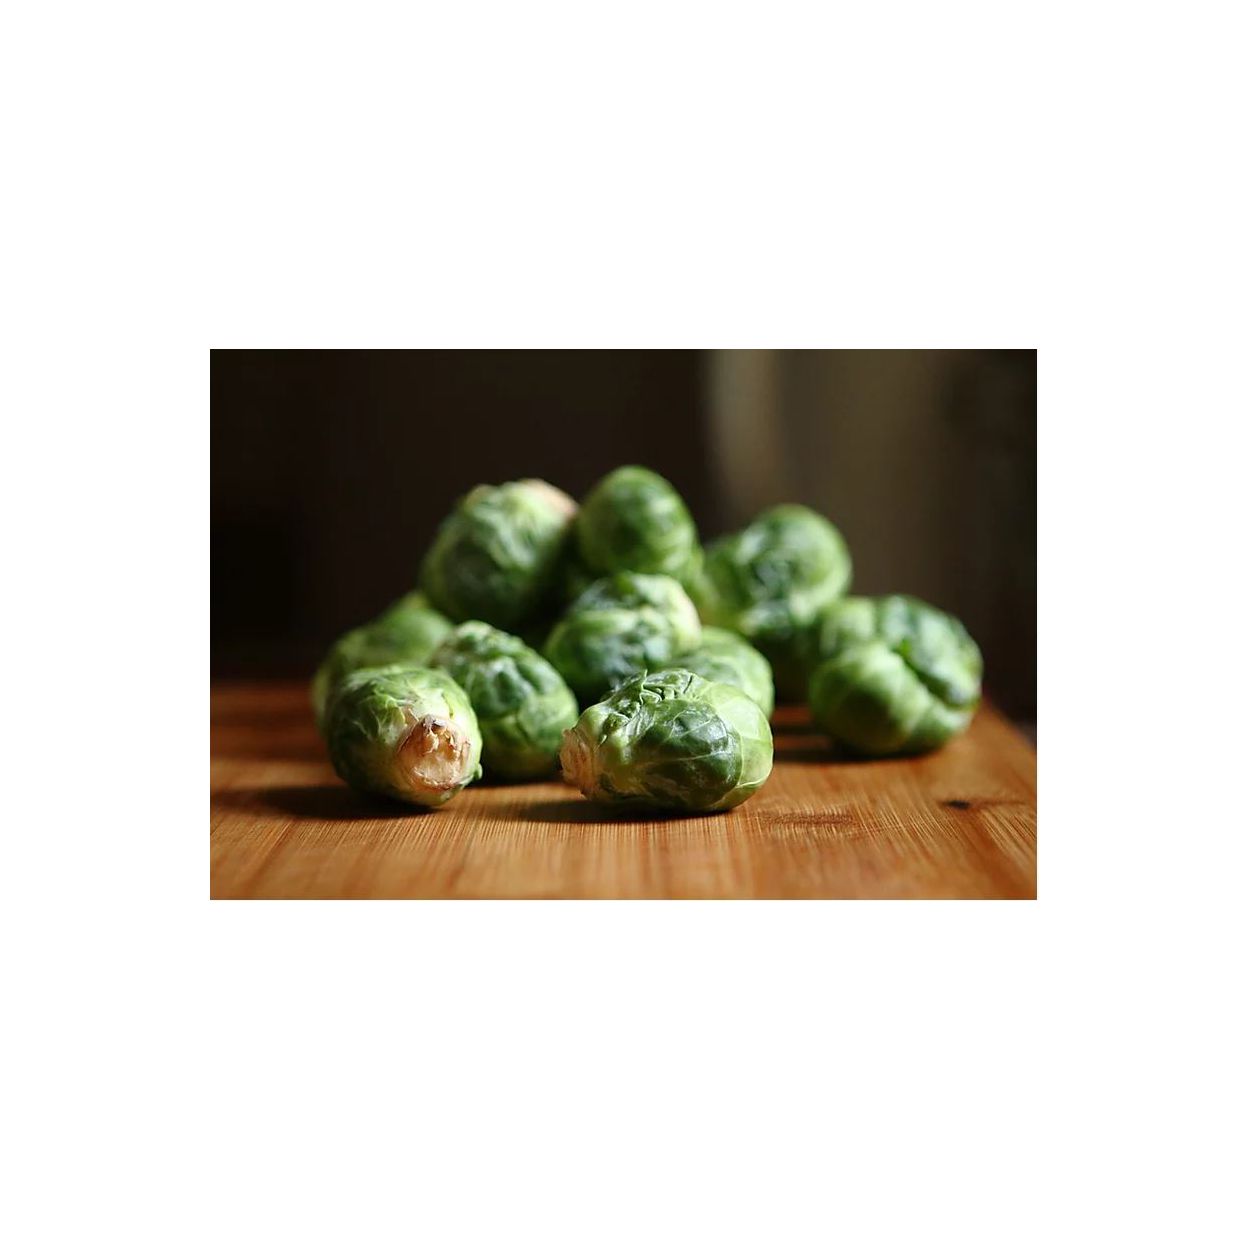 Brim Seed Co. - Long Island Improved Brussels Sprouts Heirloom Seed